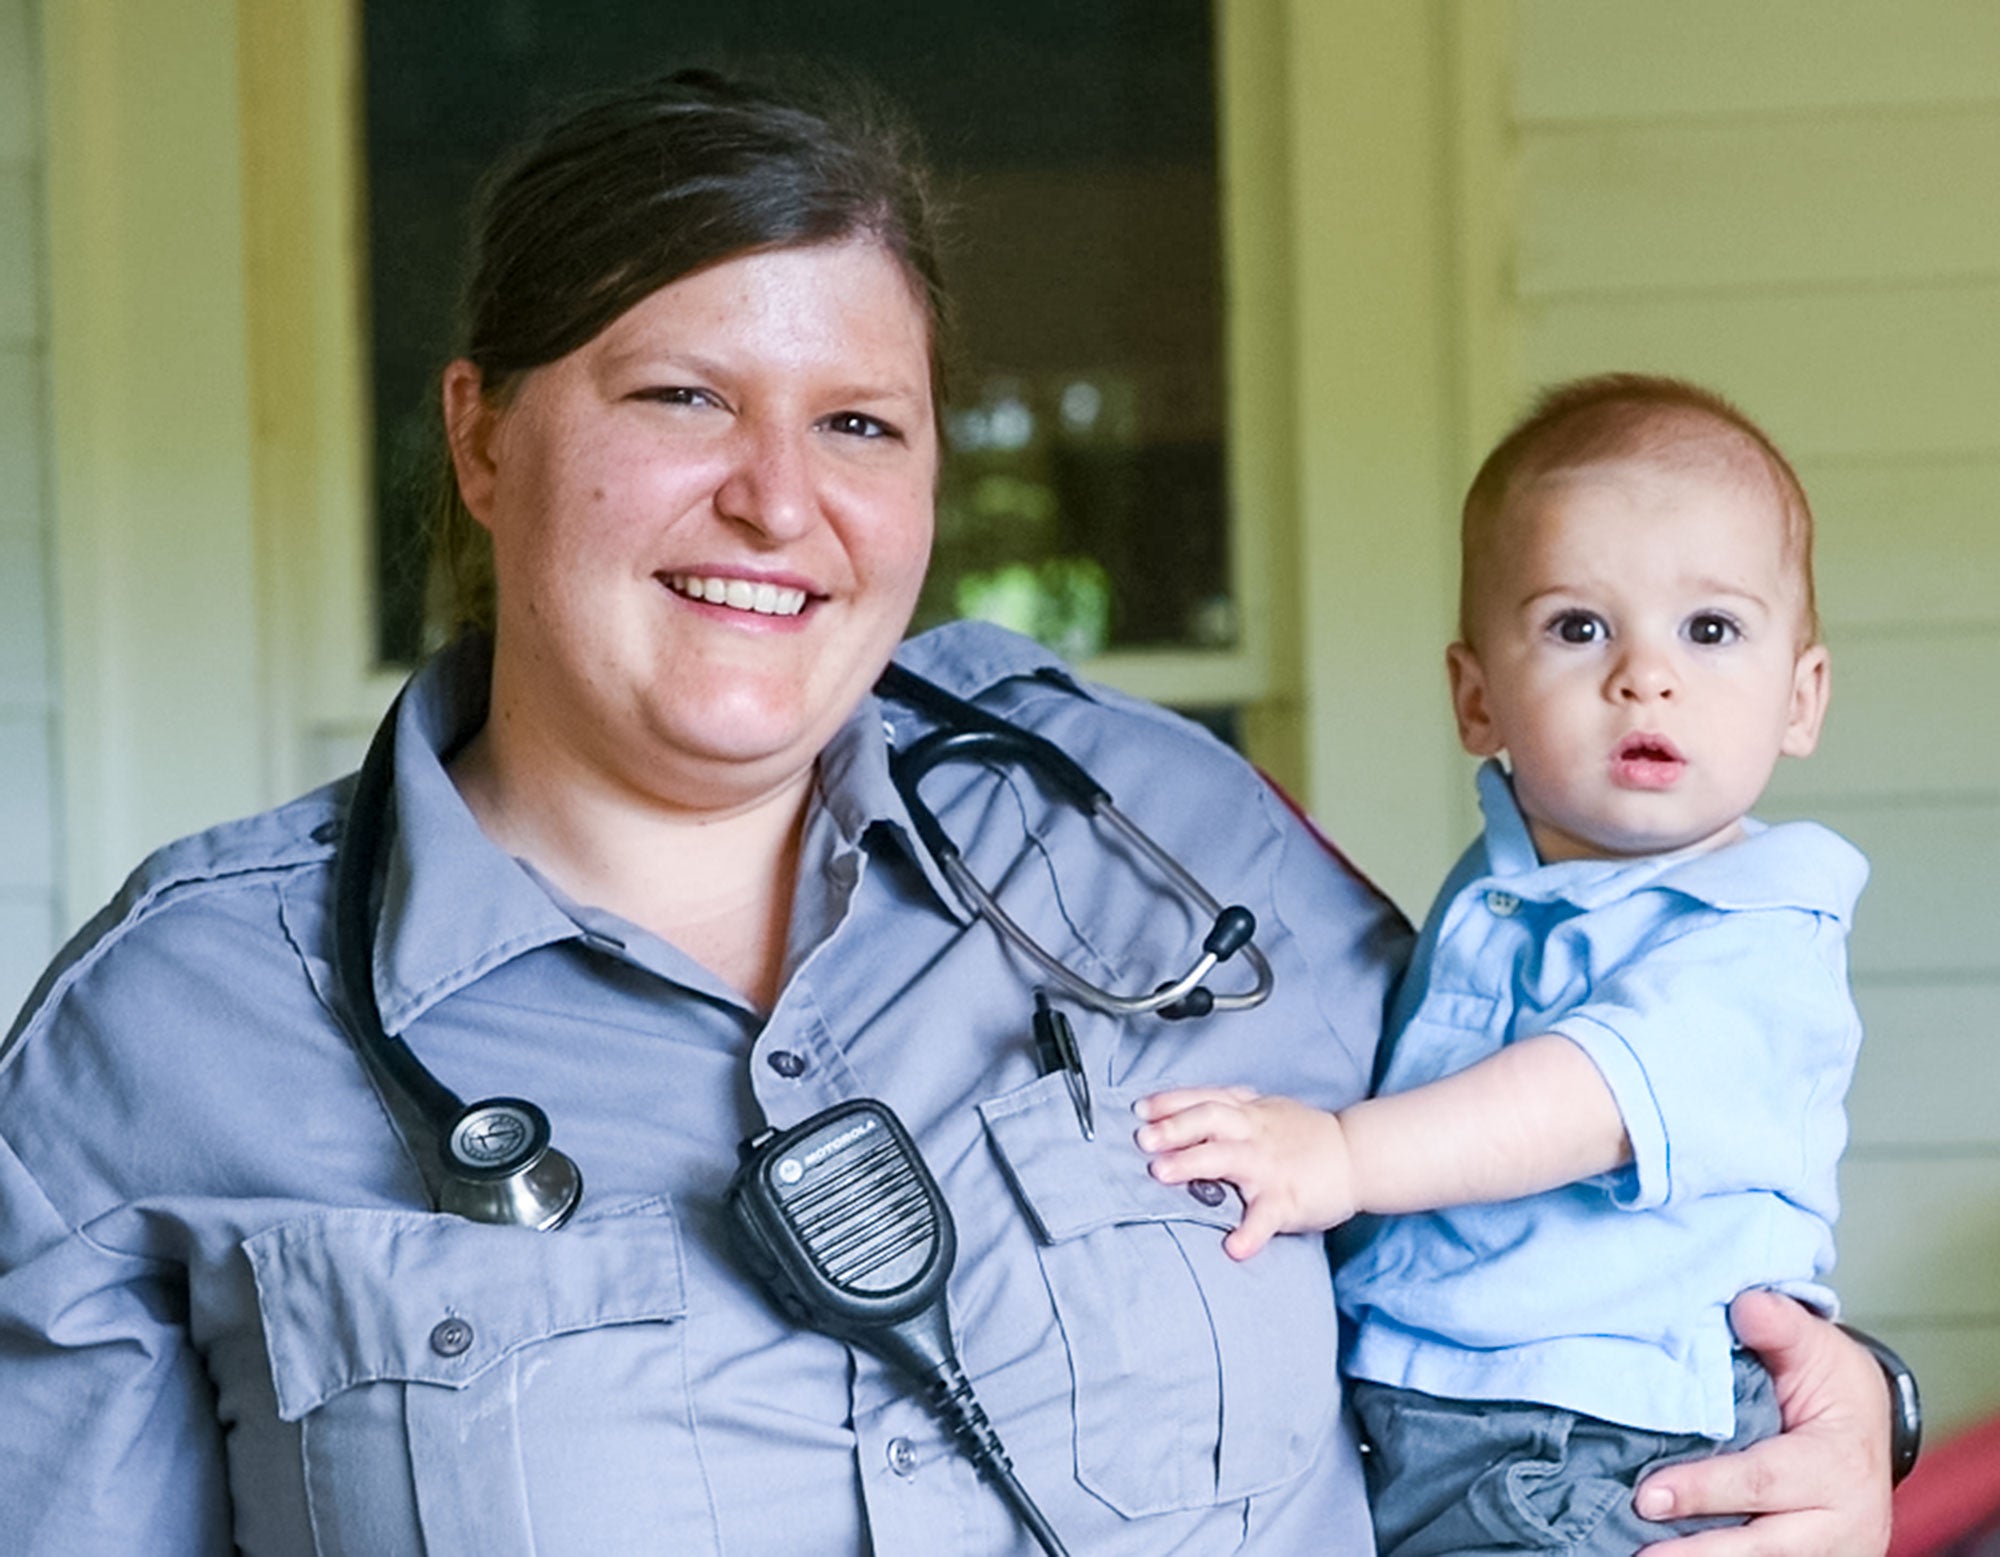 A woman emergency healthcare worker smiles in uniform while holding her young child.